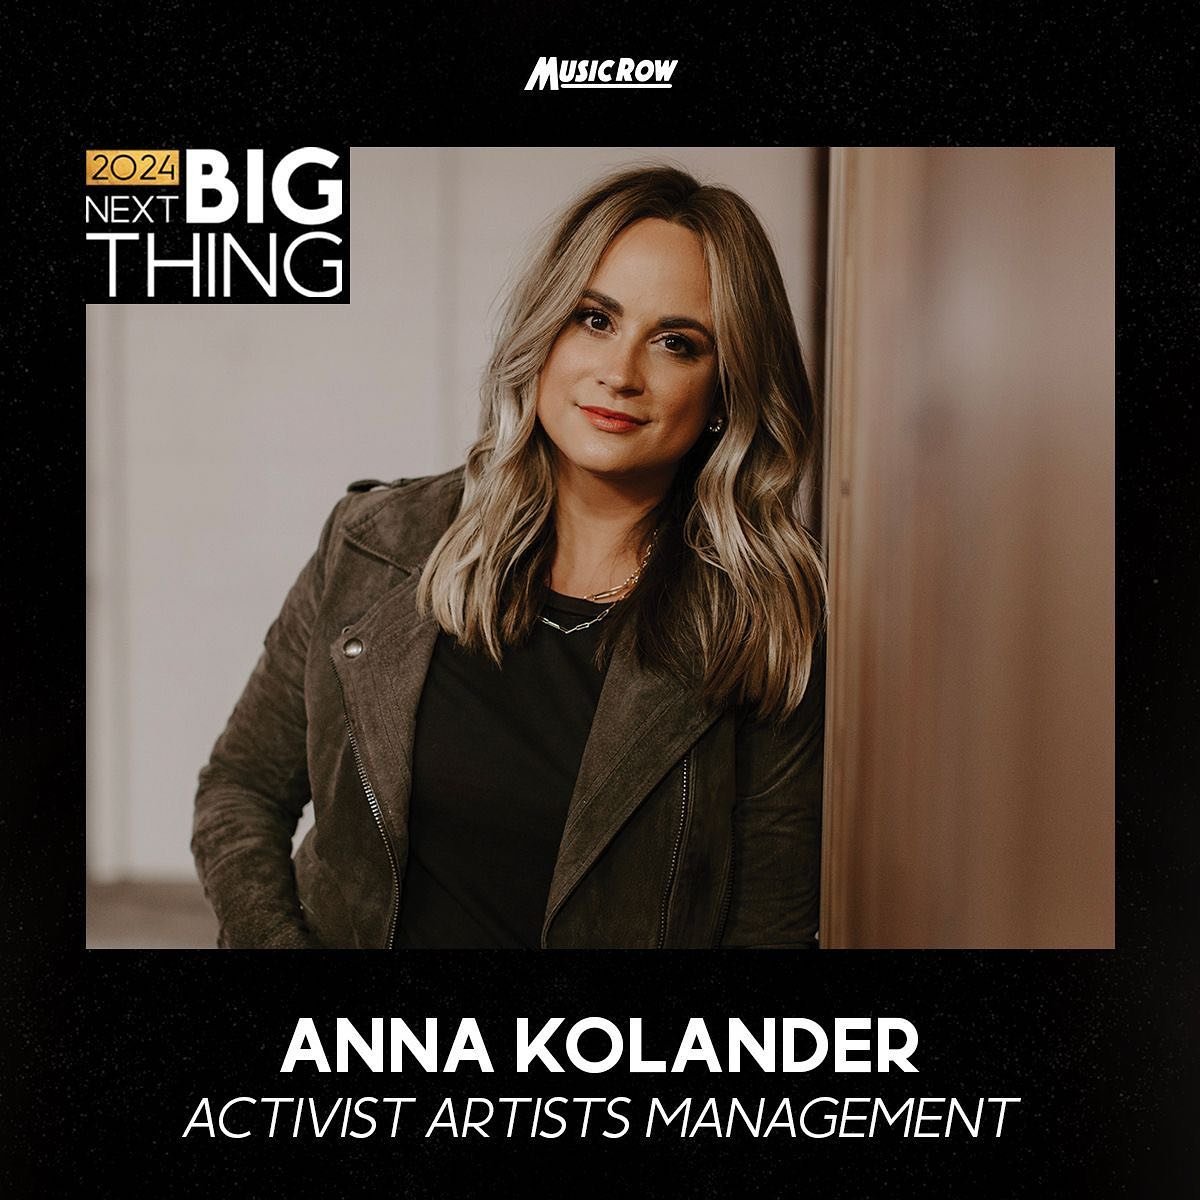 Congratulations to Anna Kolander of Activist Artists Management for being included in MusicRow Magazine&rsquo;s 2024 Next Big Thing Industry Directory 💫

Find the list at the link in our bio.